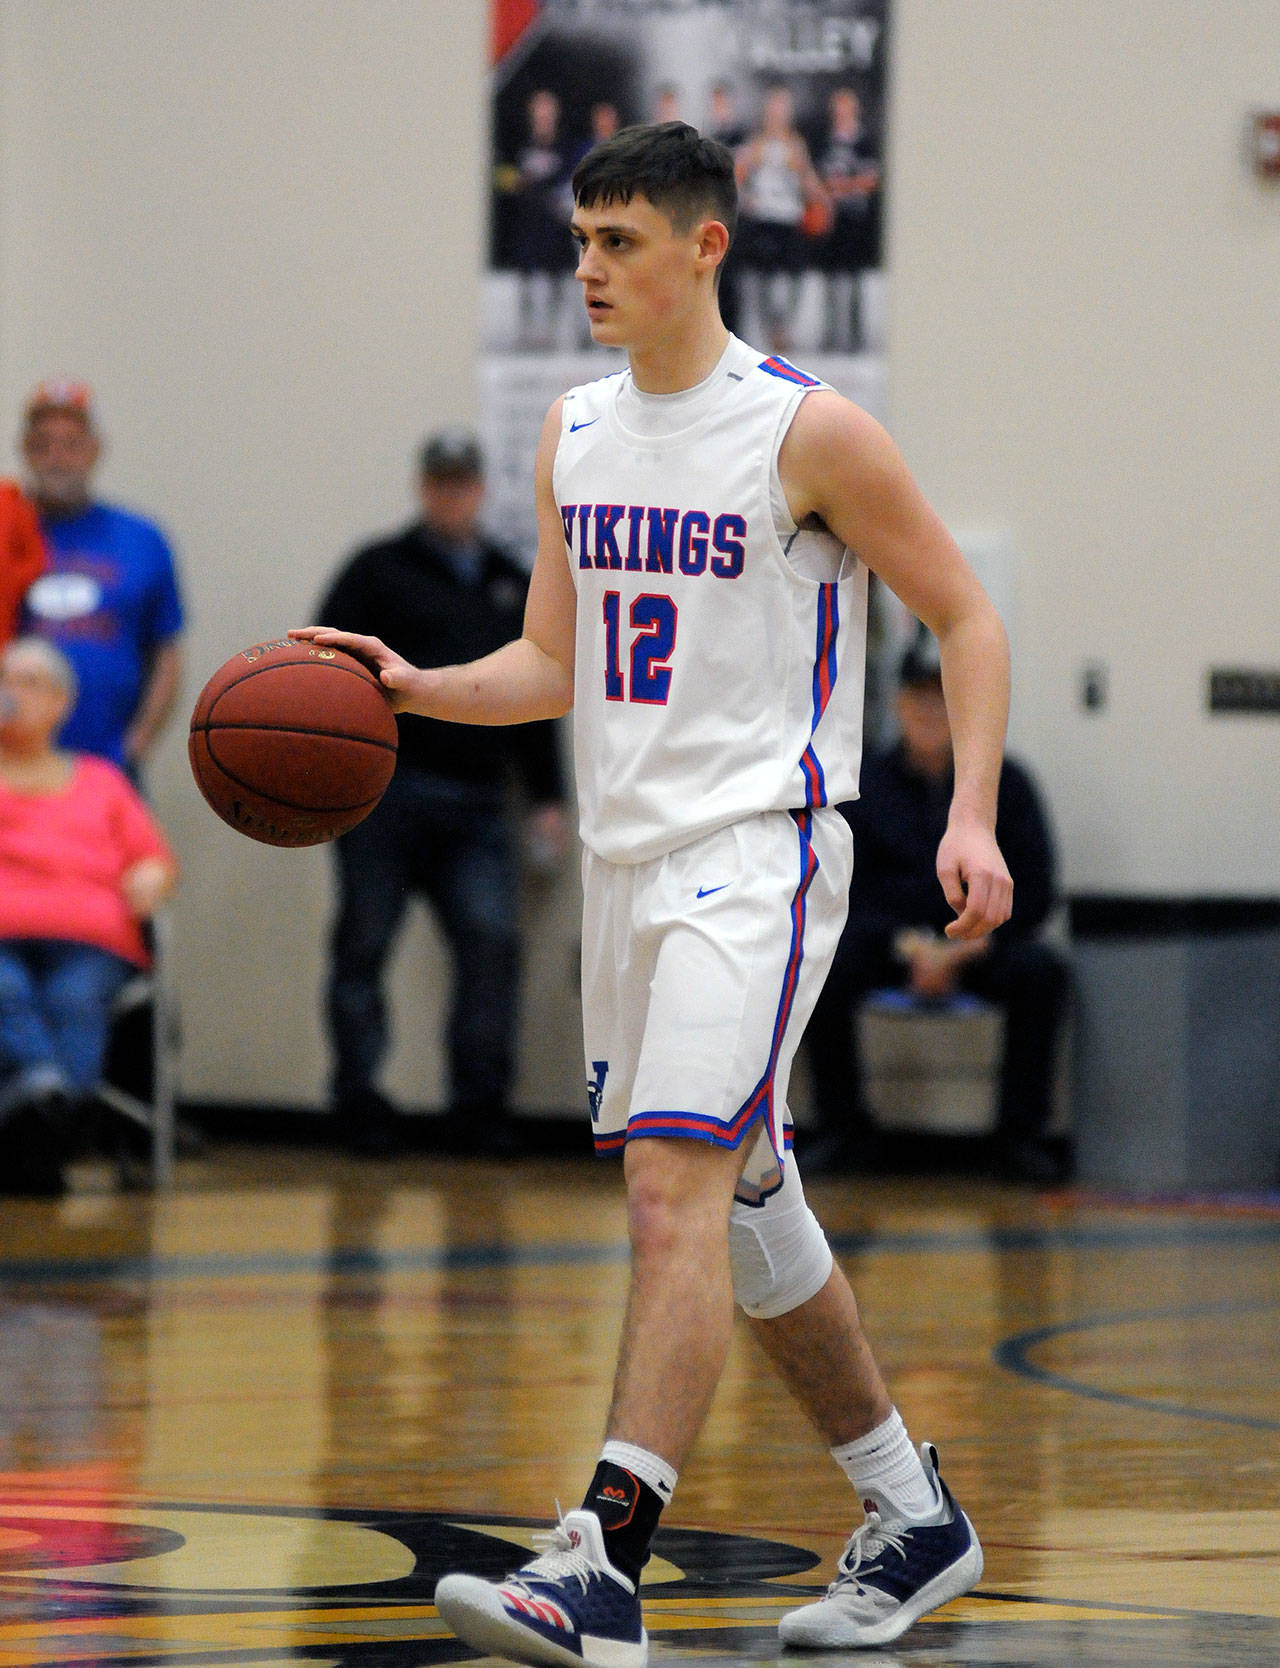 Willapa Valley’s dynamic senior guard Matt Pearson was name the 2B Boys All-Pacific League Most Valuable Player for the 2018-19 season. (Ryan Sparks | Grays Harbor News Group)